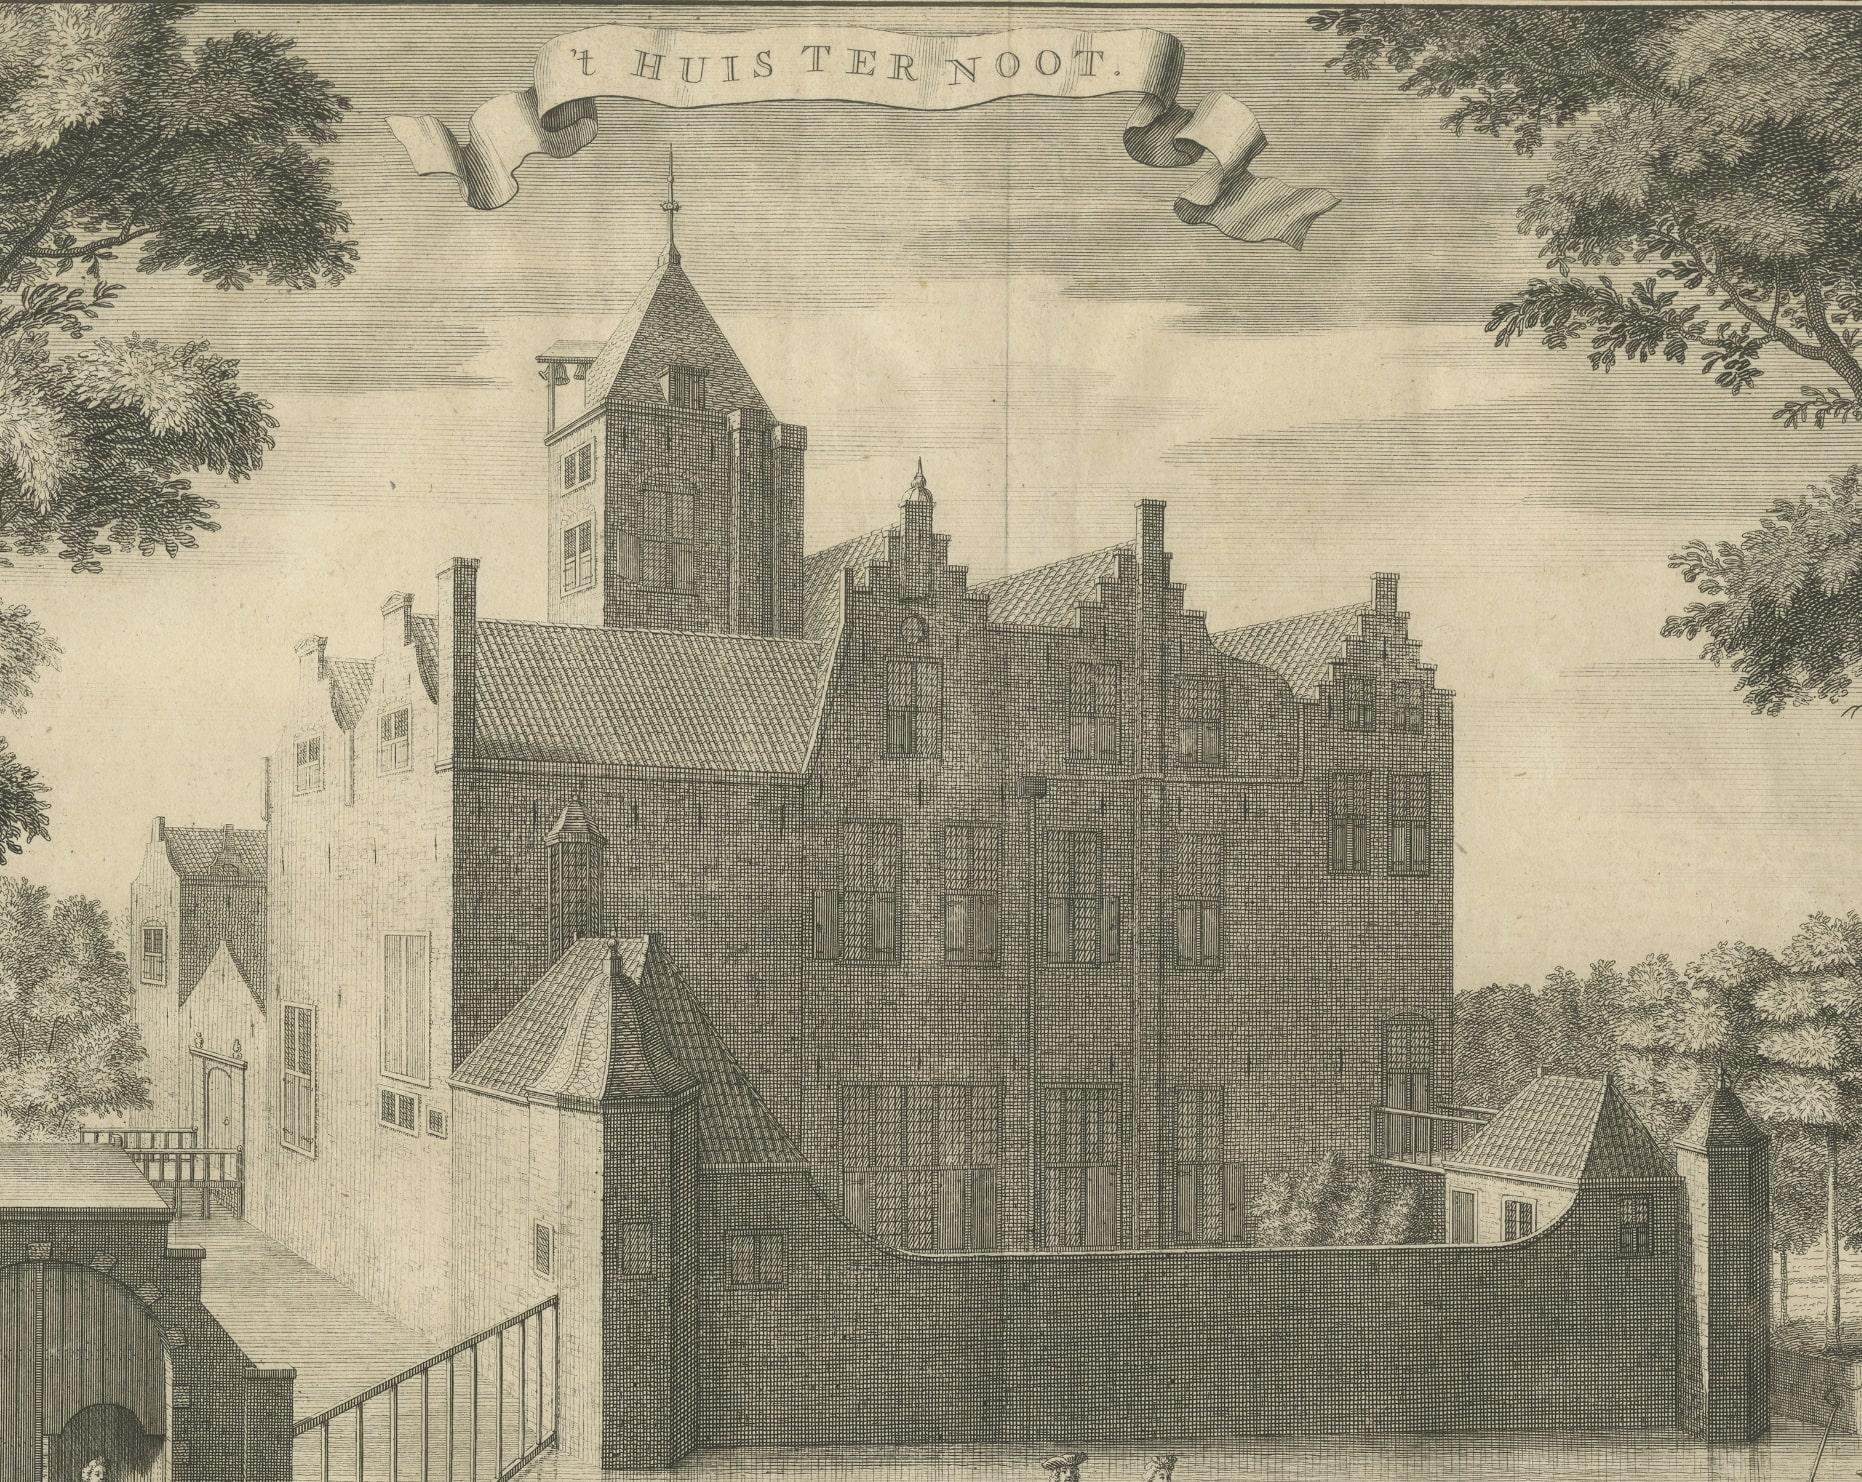 Antique print titled 't Huis Ter Noot'. View on the Huis ter Noot in The Hague (Huis ter Noot in Bezuidenhout, Den Haag). In the foreground, men and women walking and conversing. The House was built in 1595 for Karel ter Noot, a captain in the